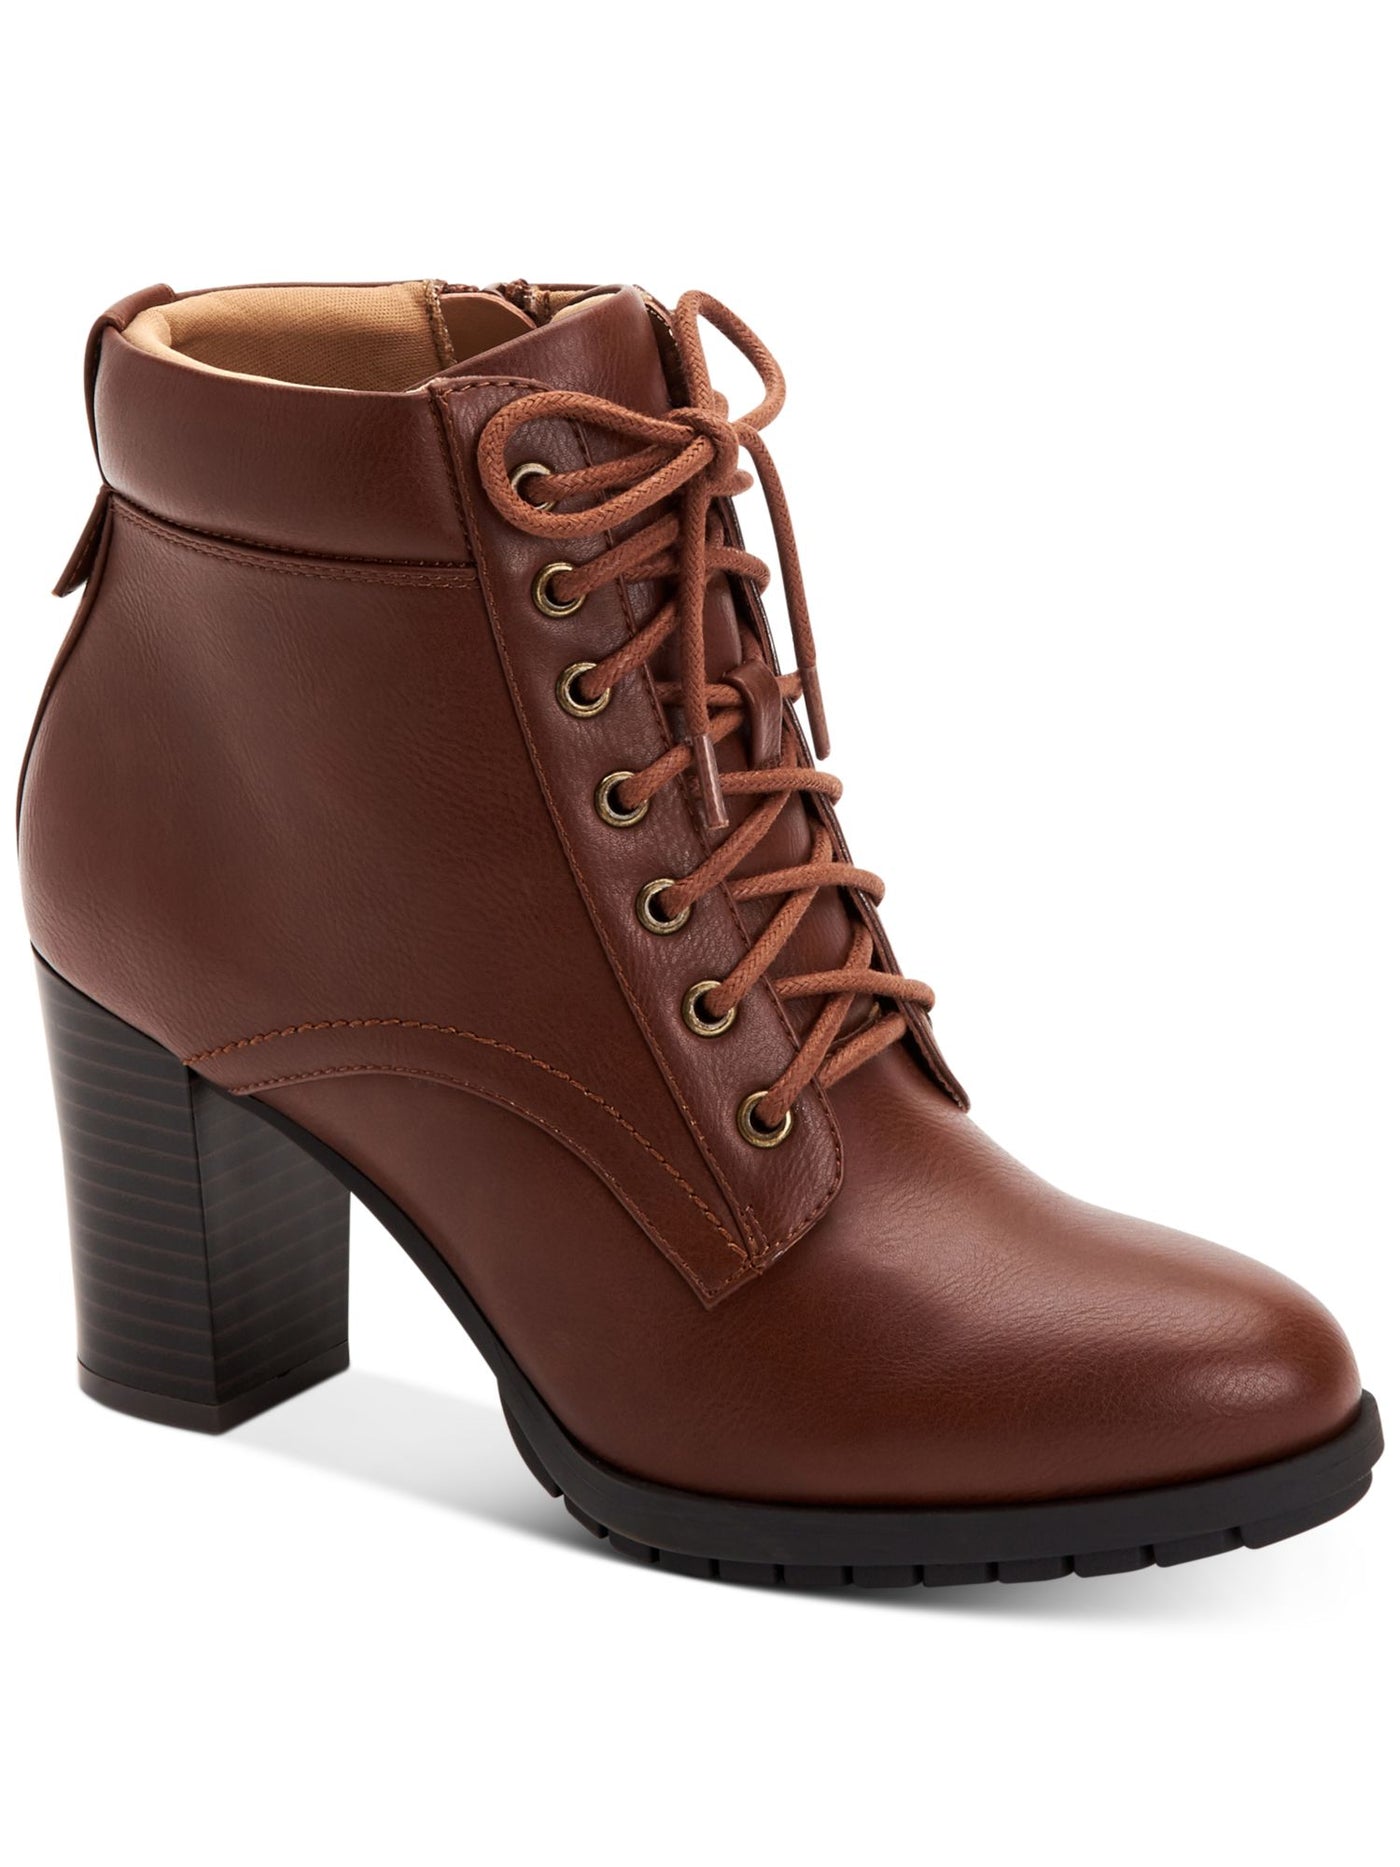 STYLE & COMPANY Womens Brown Lucillee Almond Toe Lace-Up Heeled Boots 11 M